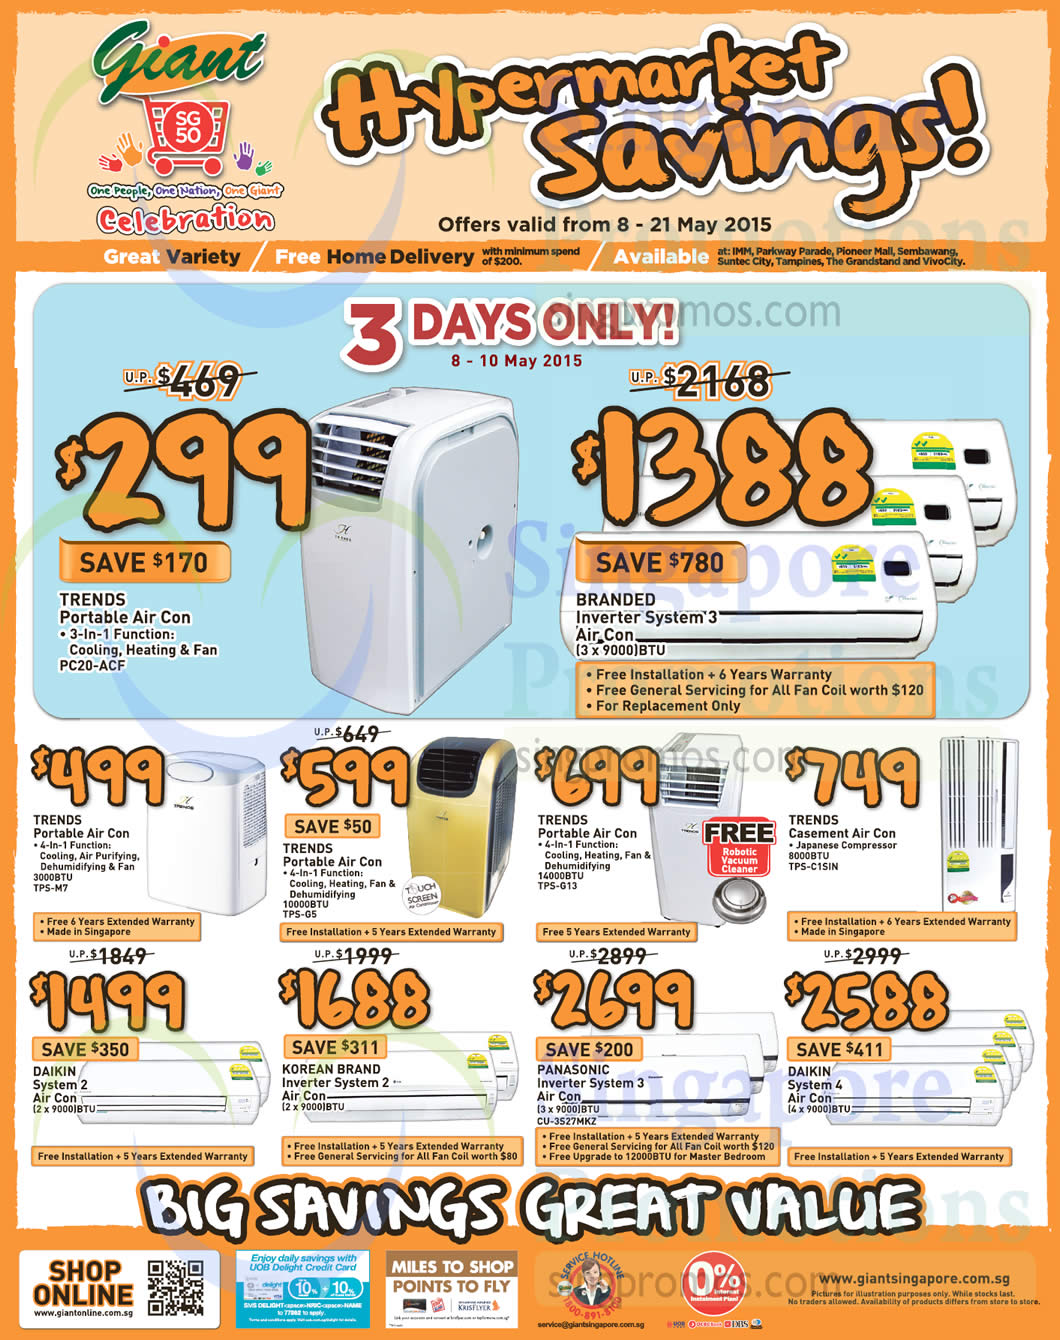 Featured image for Giant Hypermarket Air Conditioners, Fans & More Offers 8 - 21 May 2015